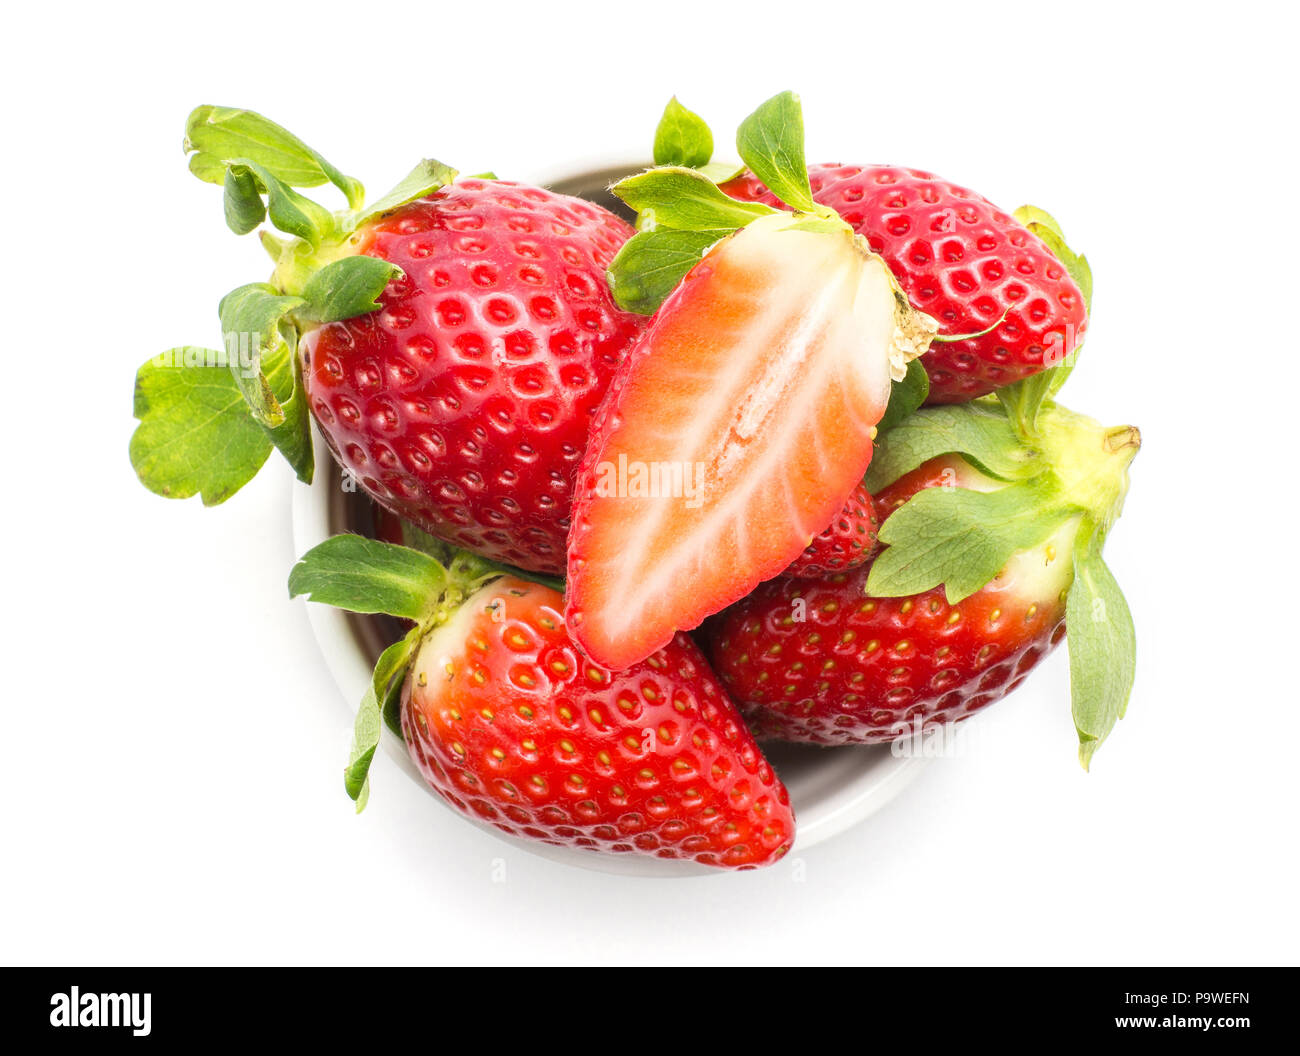 Garden strawberries in a ceramic top view isolated on white background ideal breakfast one fleshy sliced half on top Stock Photo